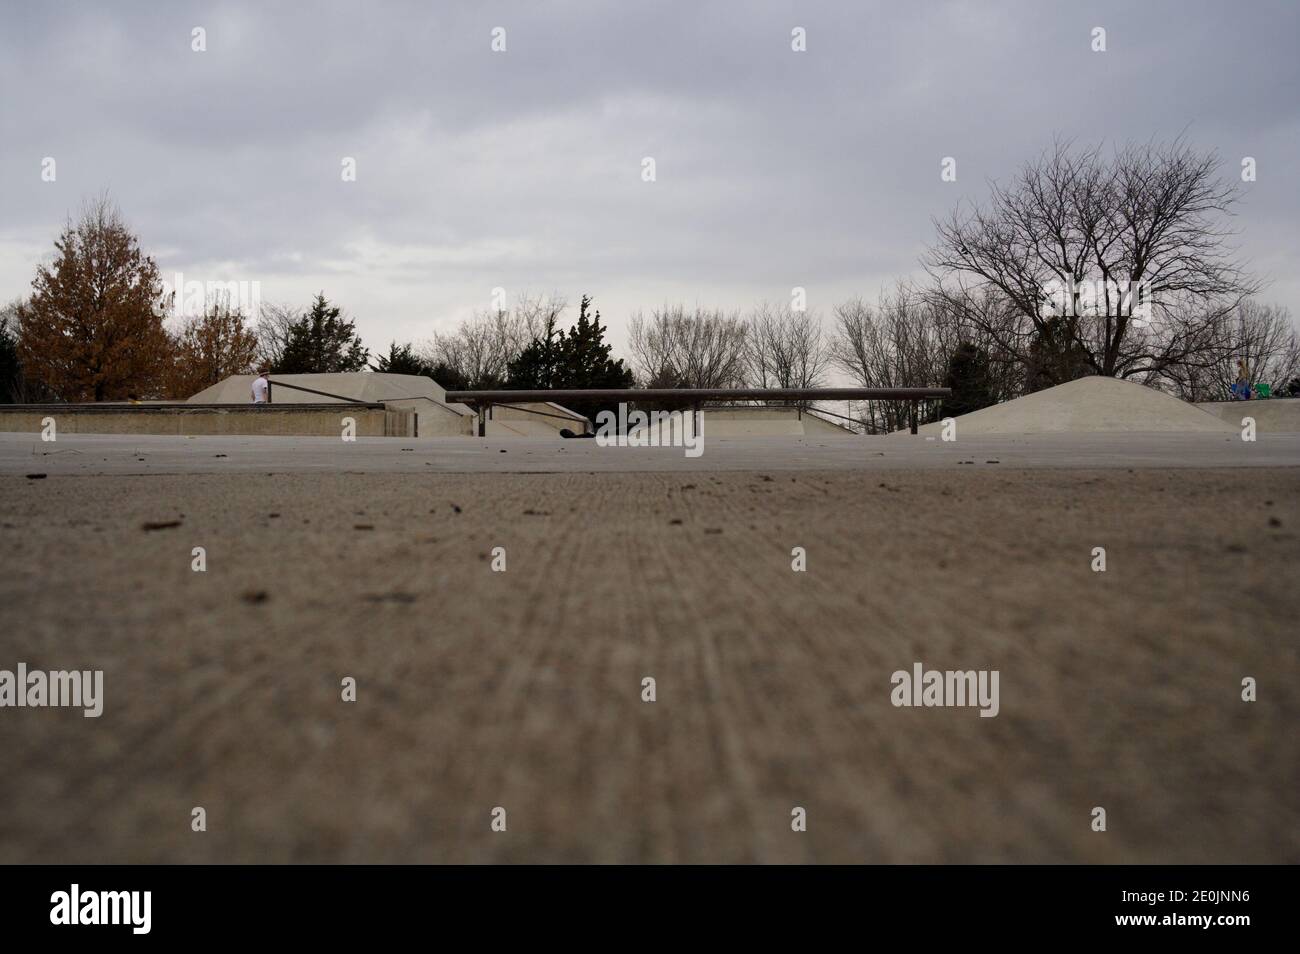 A wide ground-level shot of a rail at a skate park on a cloudy day. Concrete ramps slope in the background. Stock Photo